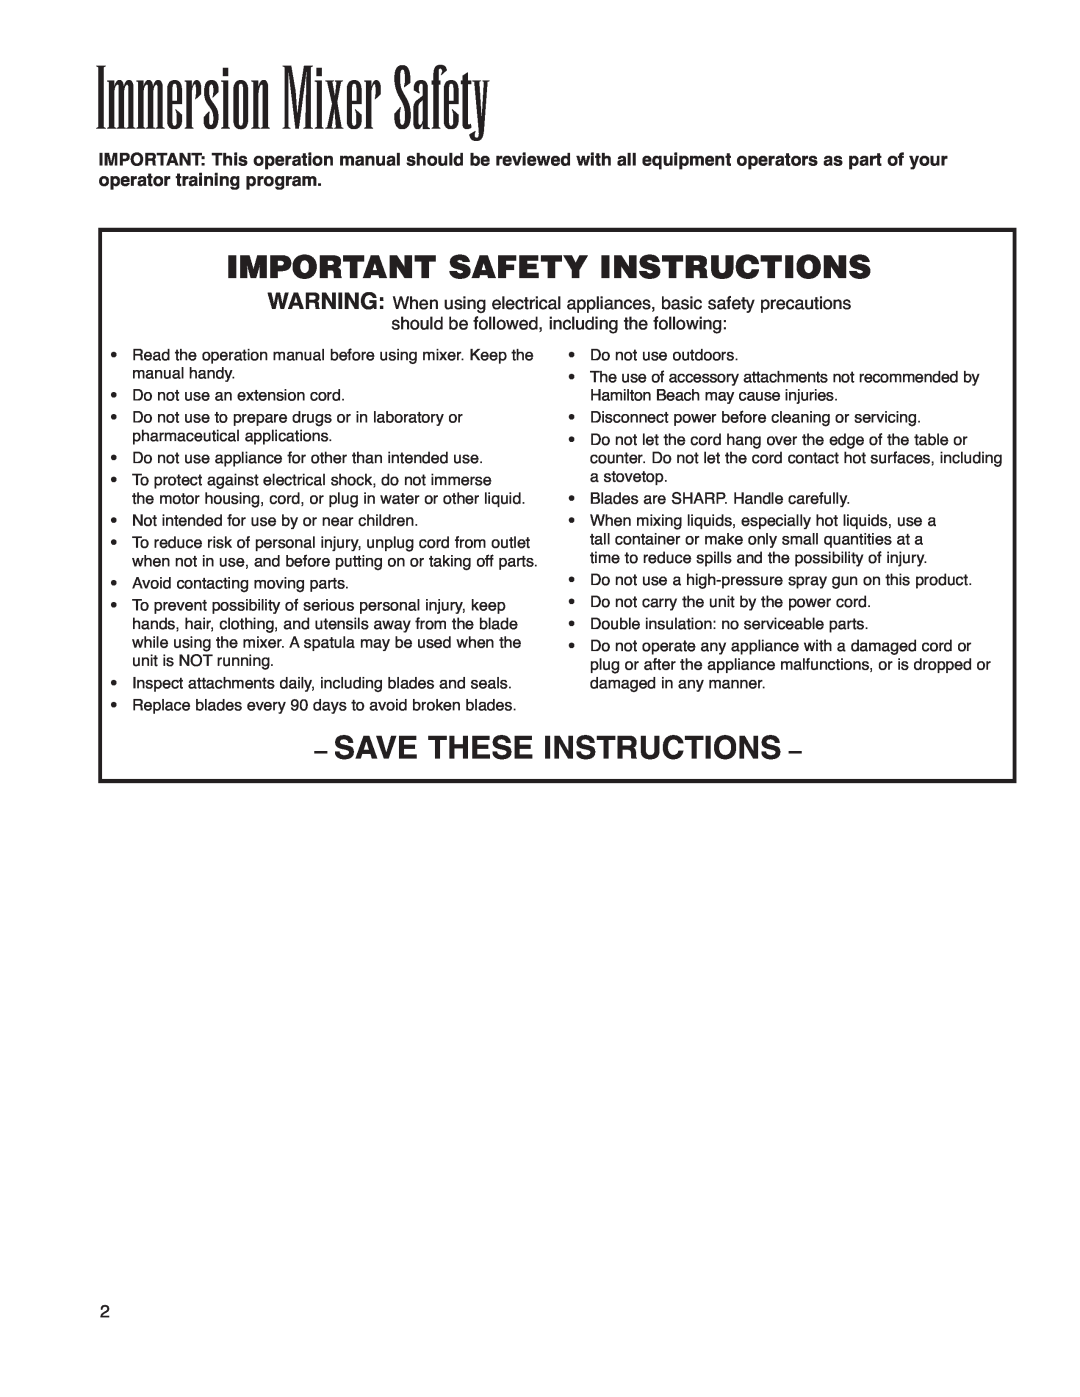 Hamilton Beach operation manual Immersion Mixer Safety, Important Safety Instructions, Save These Instructions 